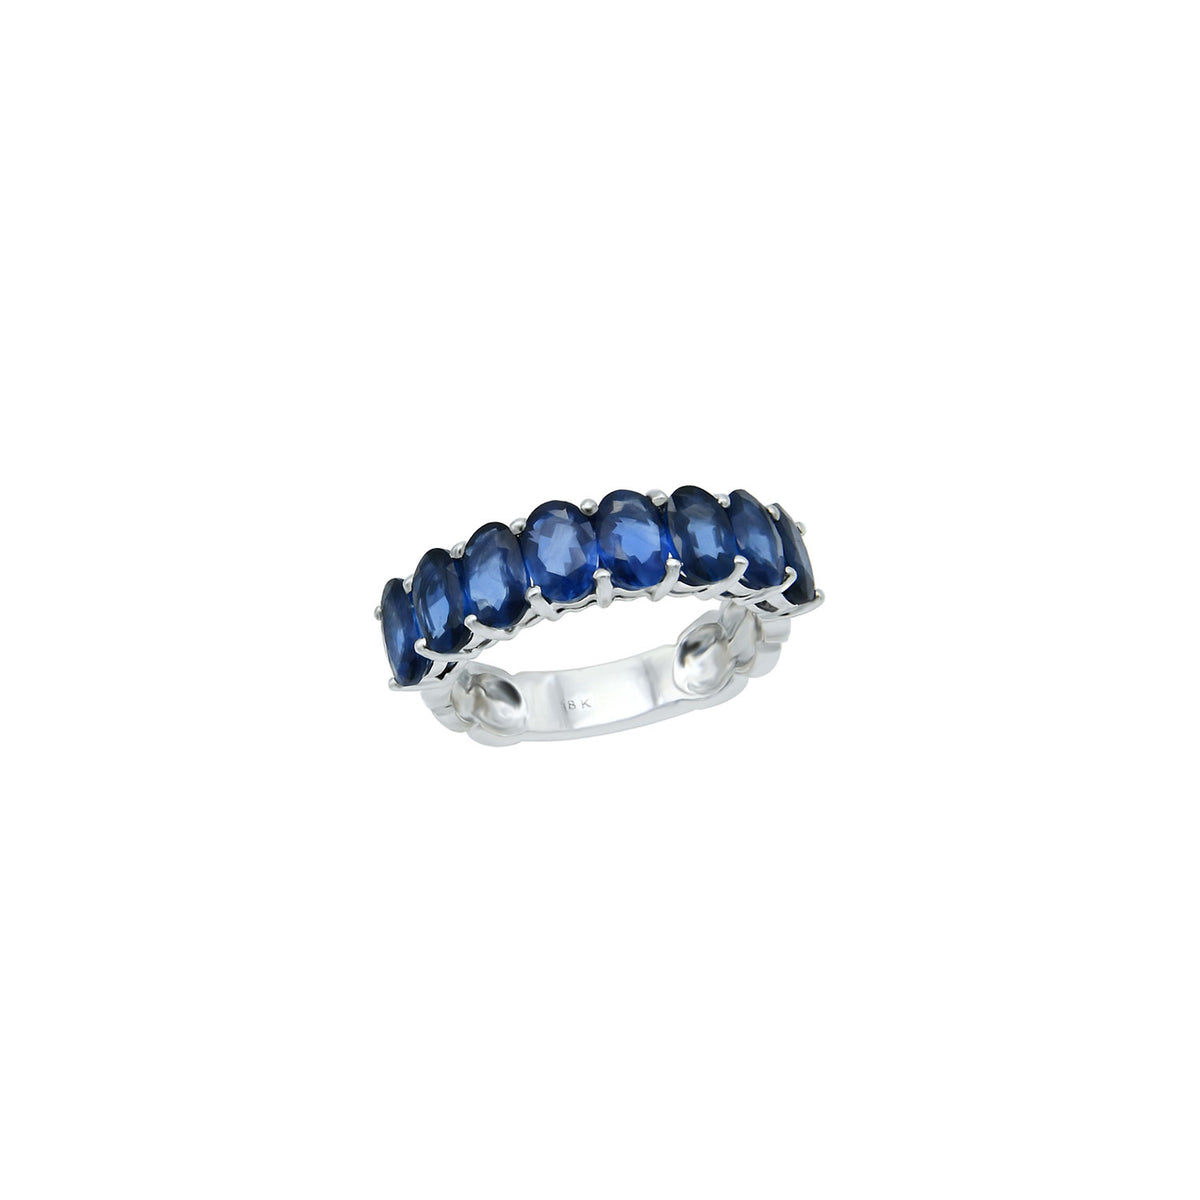 Sapphire band. Sapphire eternity ring. Sapphire ring. Oval sapphires ring.